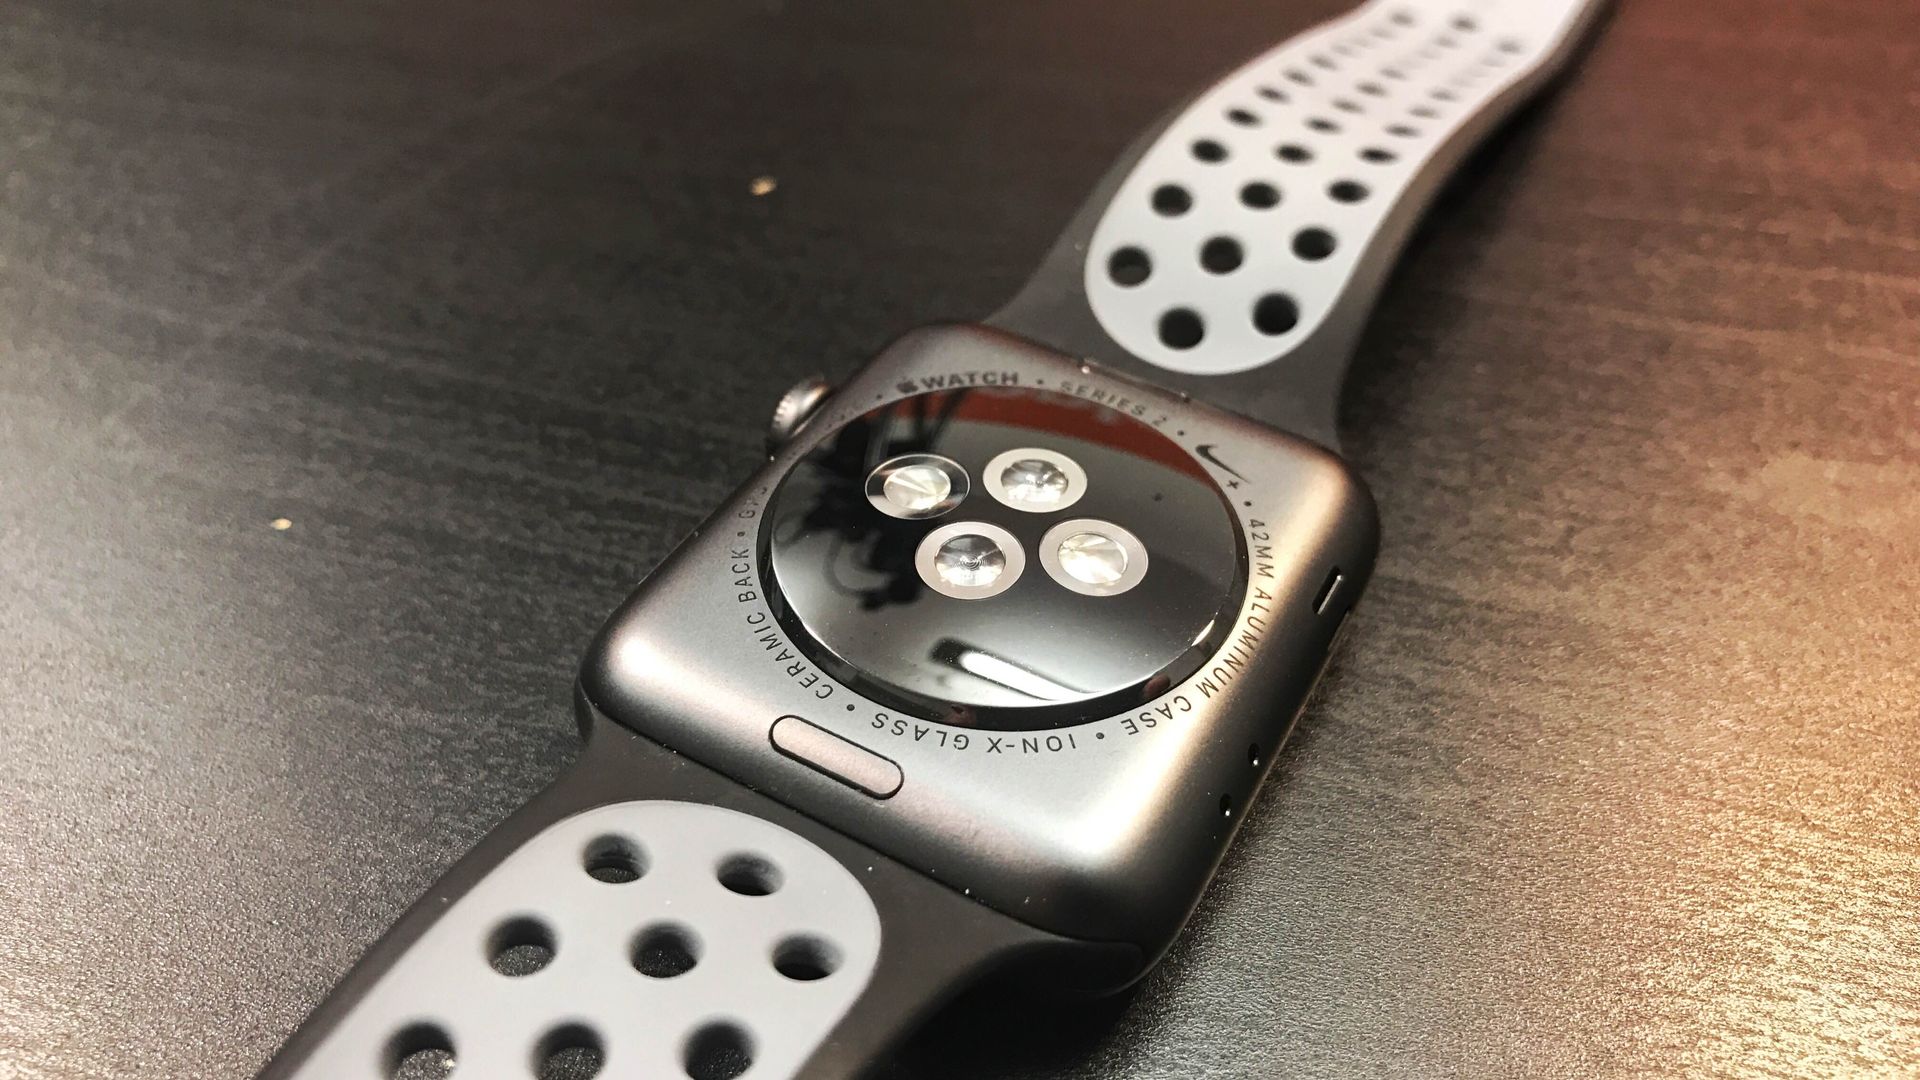 Swollen Apple Watch 2 battery? You can get it fixed for free TechRadar